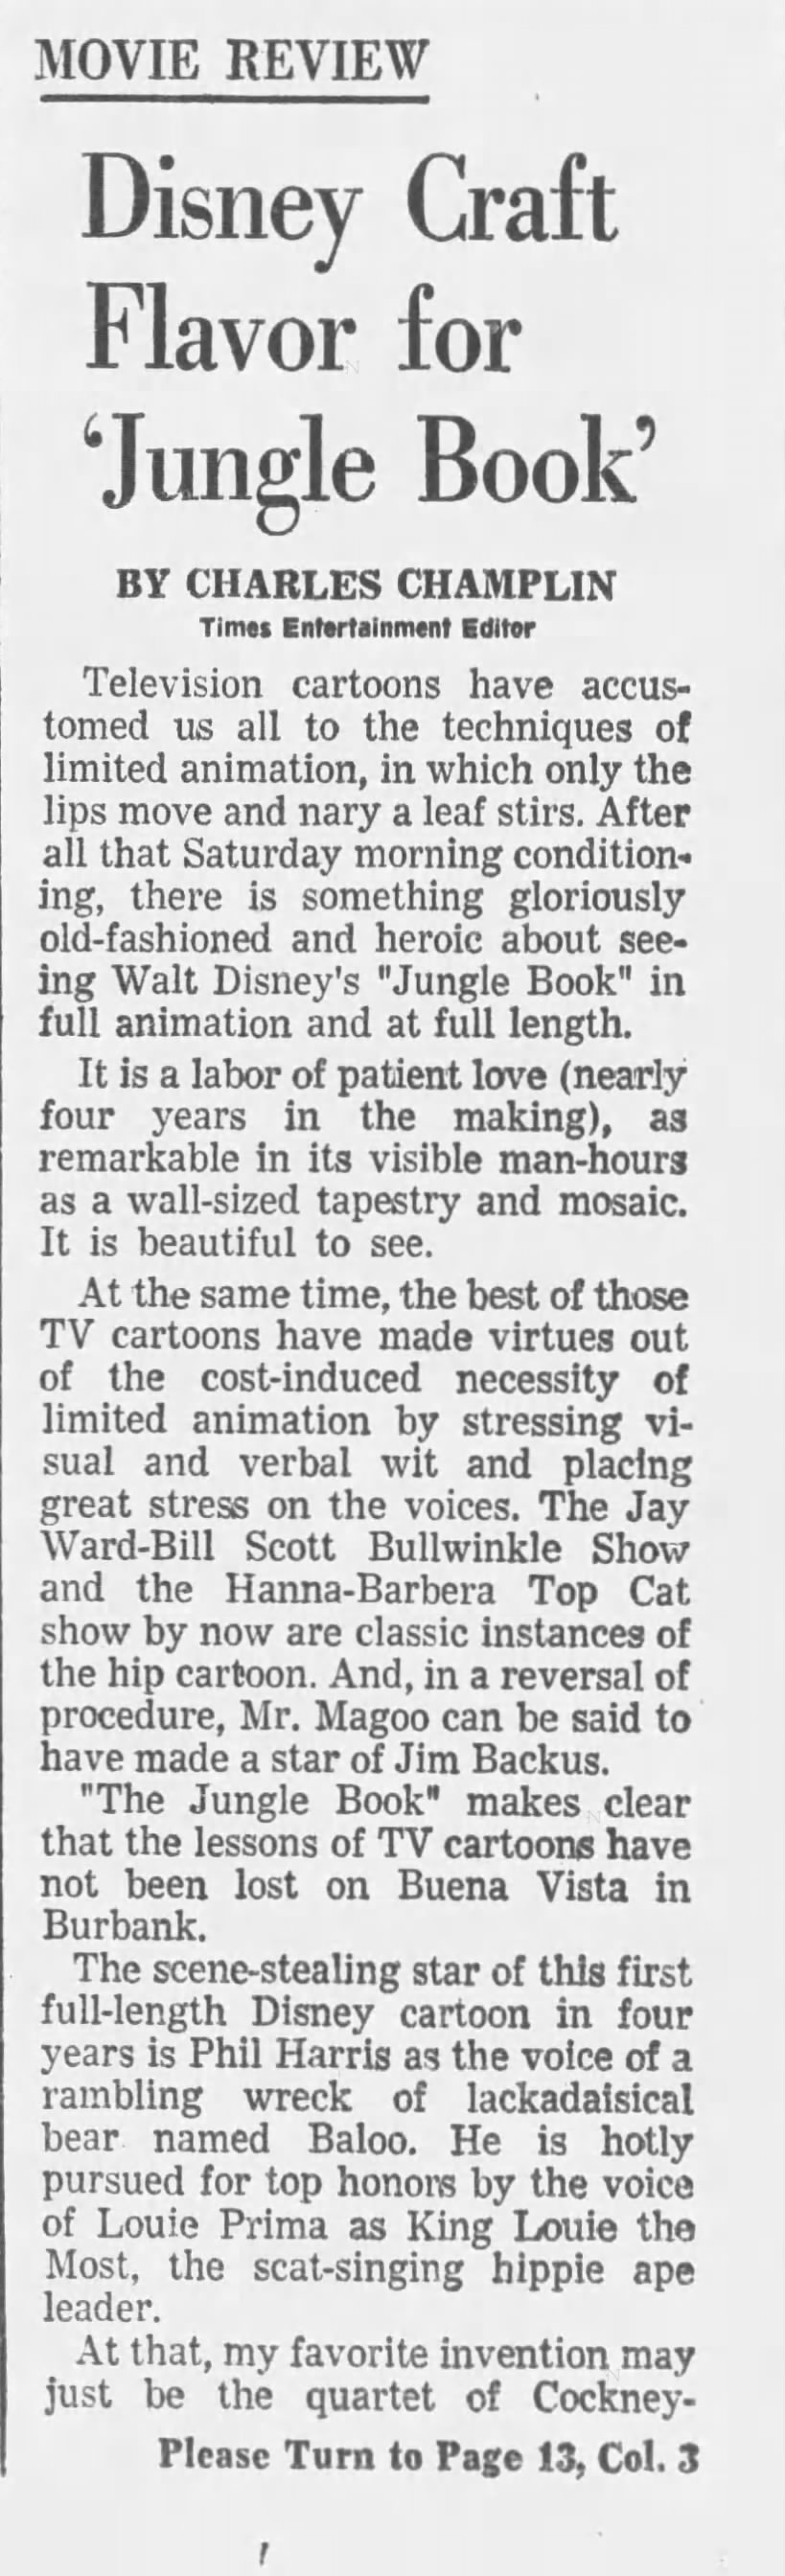 Charles Champlin's review of 'The Jungle Book' (1967) (1/2)